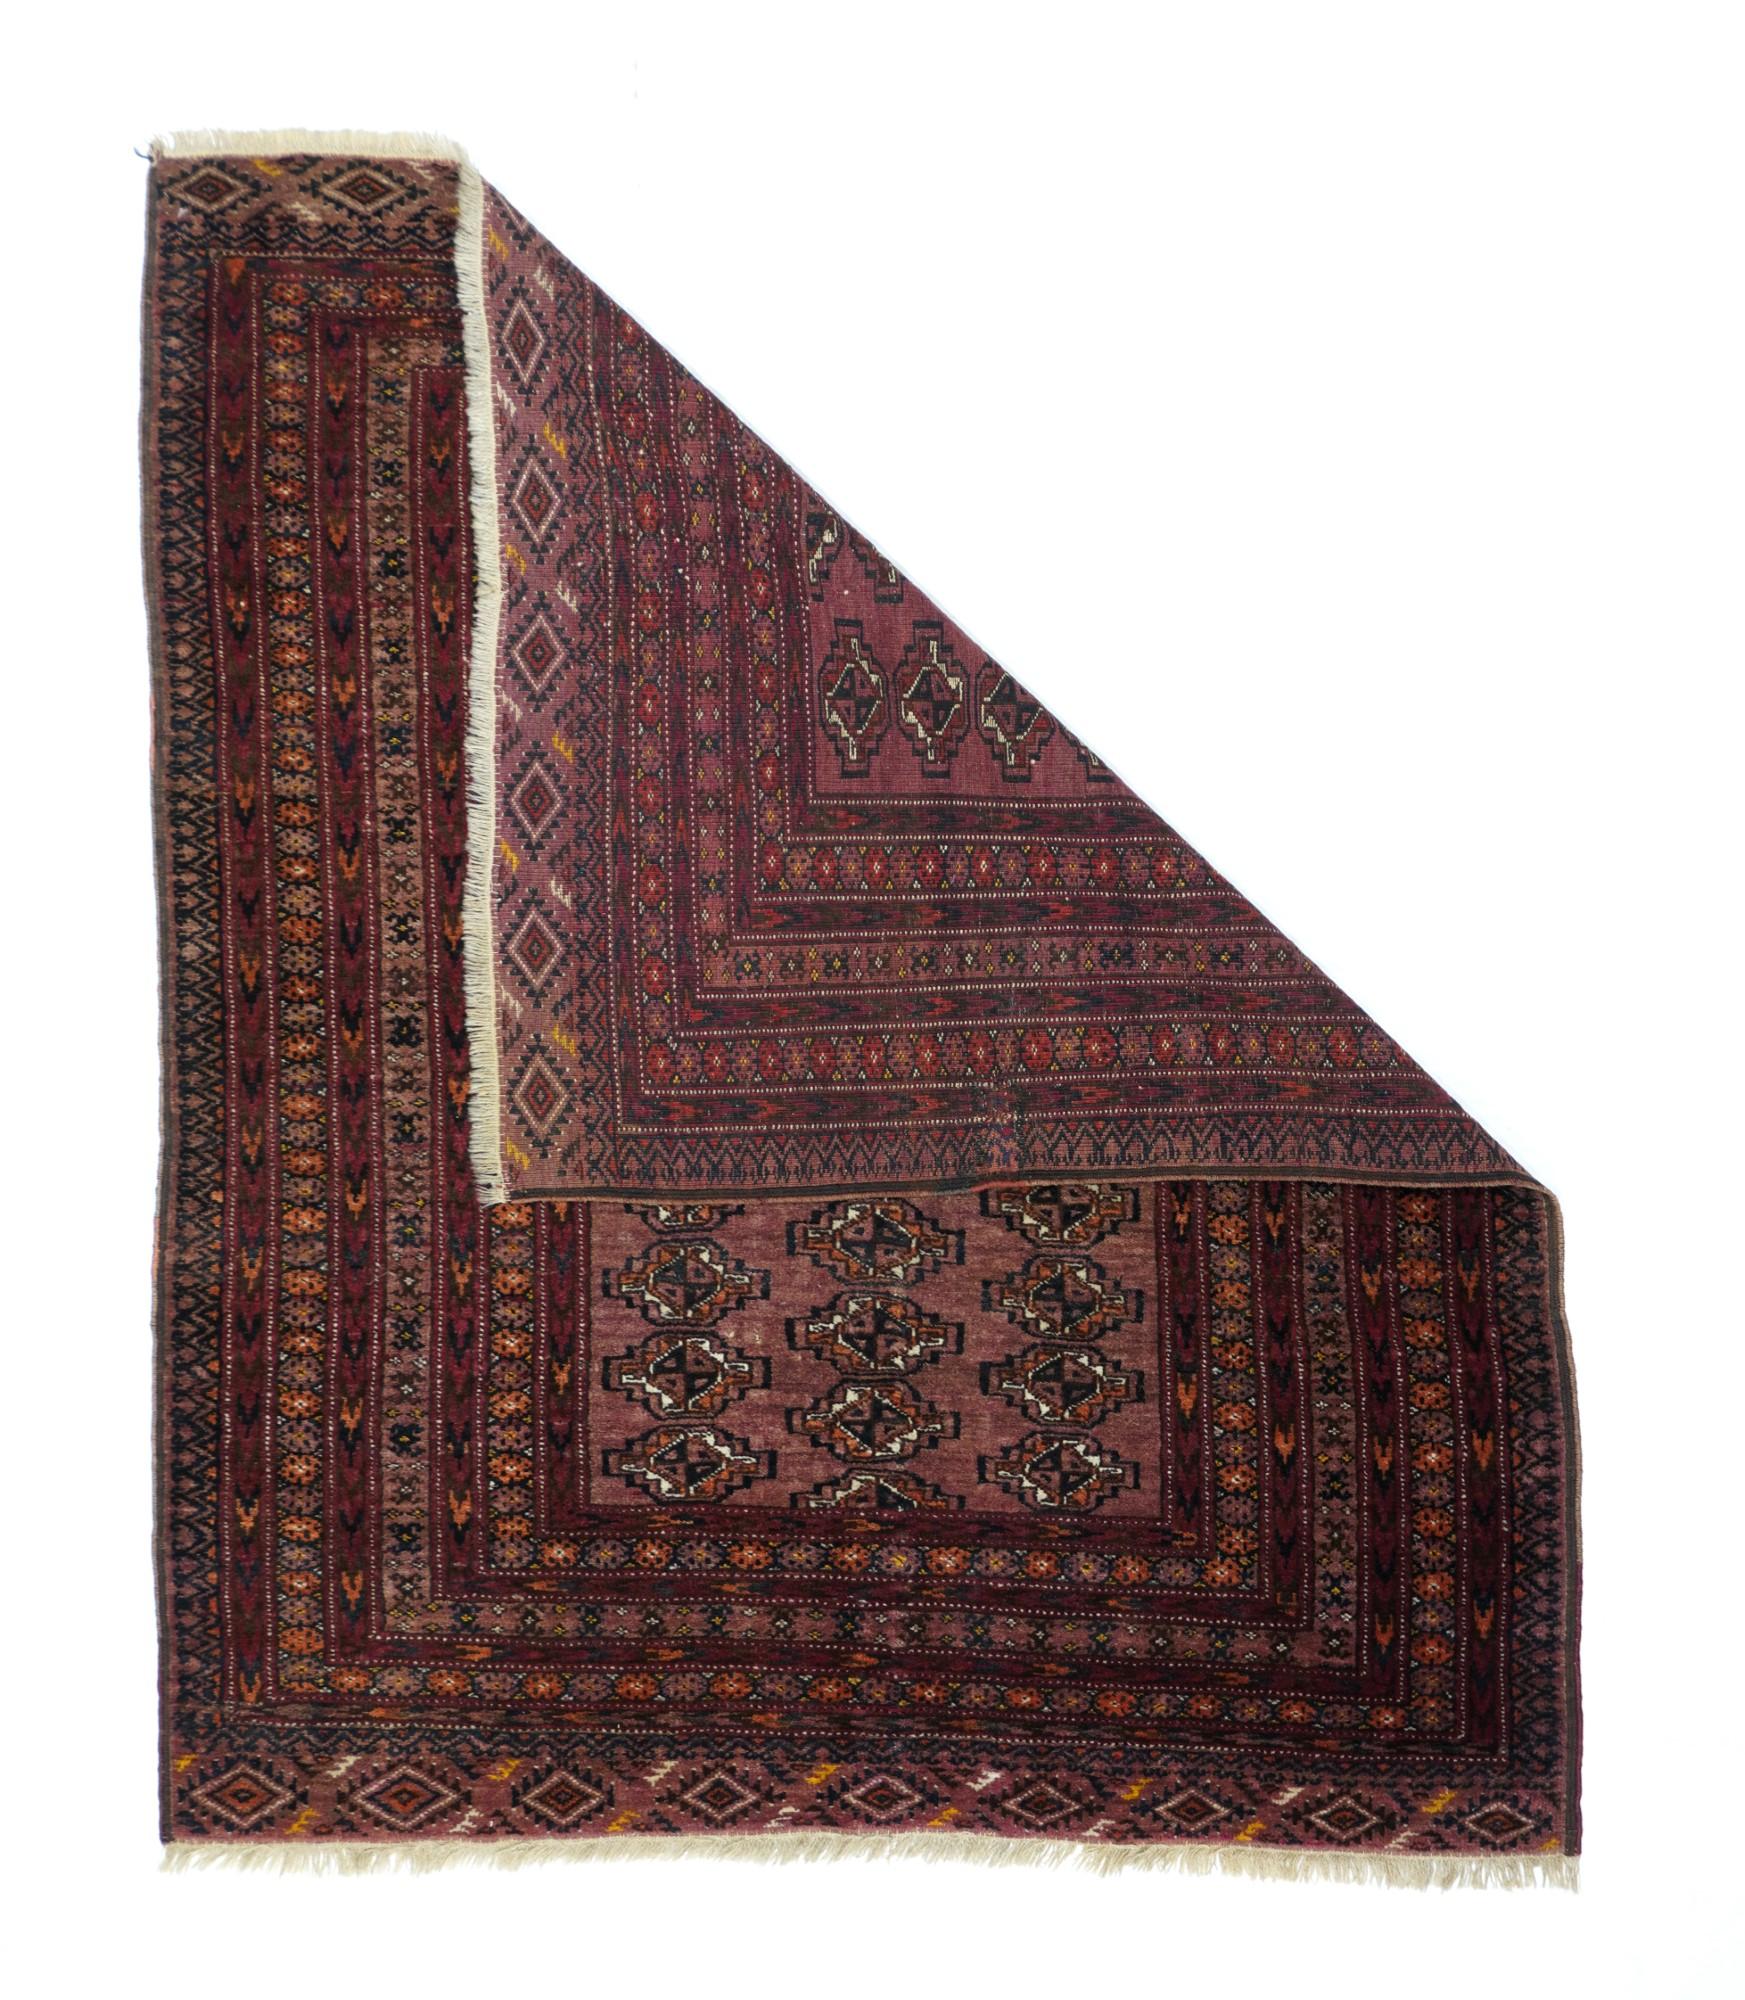 Vintage Bokhara rug measures 3'11'' x 4'9''. This all wool nomadic scatter shows a small red field with three offset columns of flattened, quartered guls, with a system of eight patterned borders including four with chevrons. Elem's (extra end